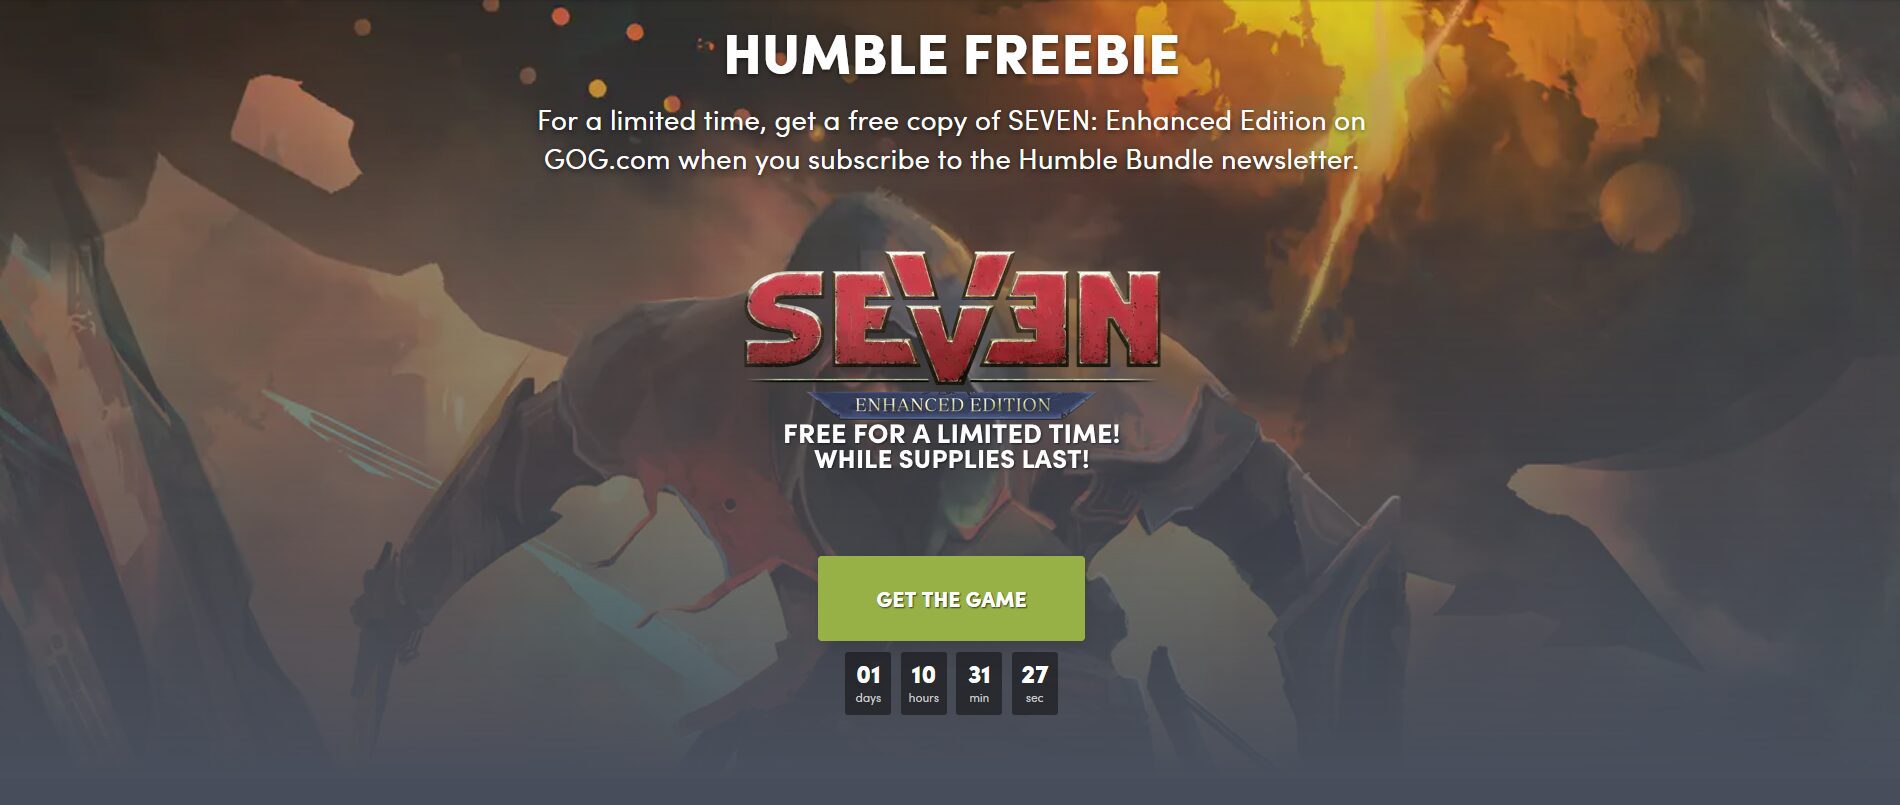 Seven: Enhanced Edition Is Free On Humble Bundle For A Limited Time